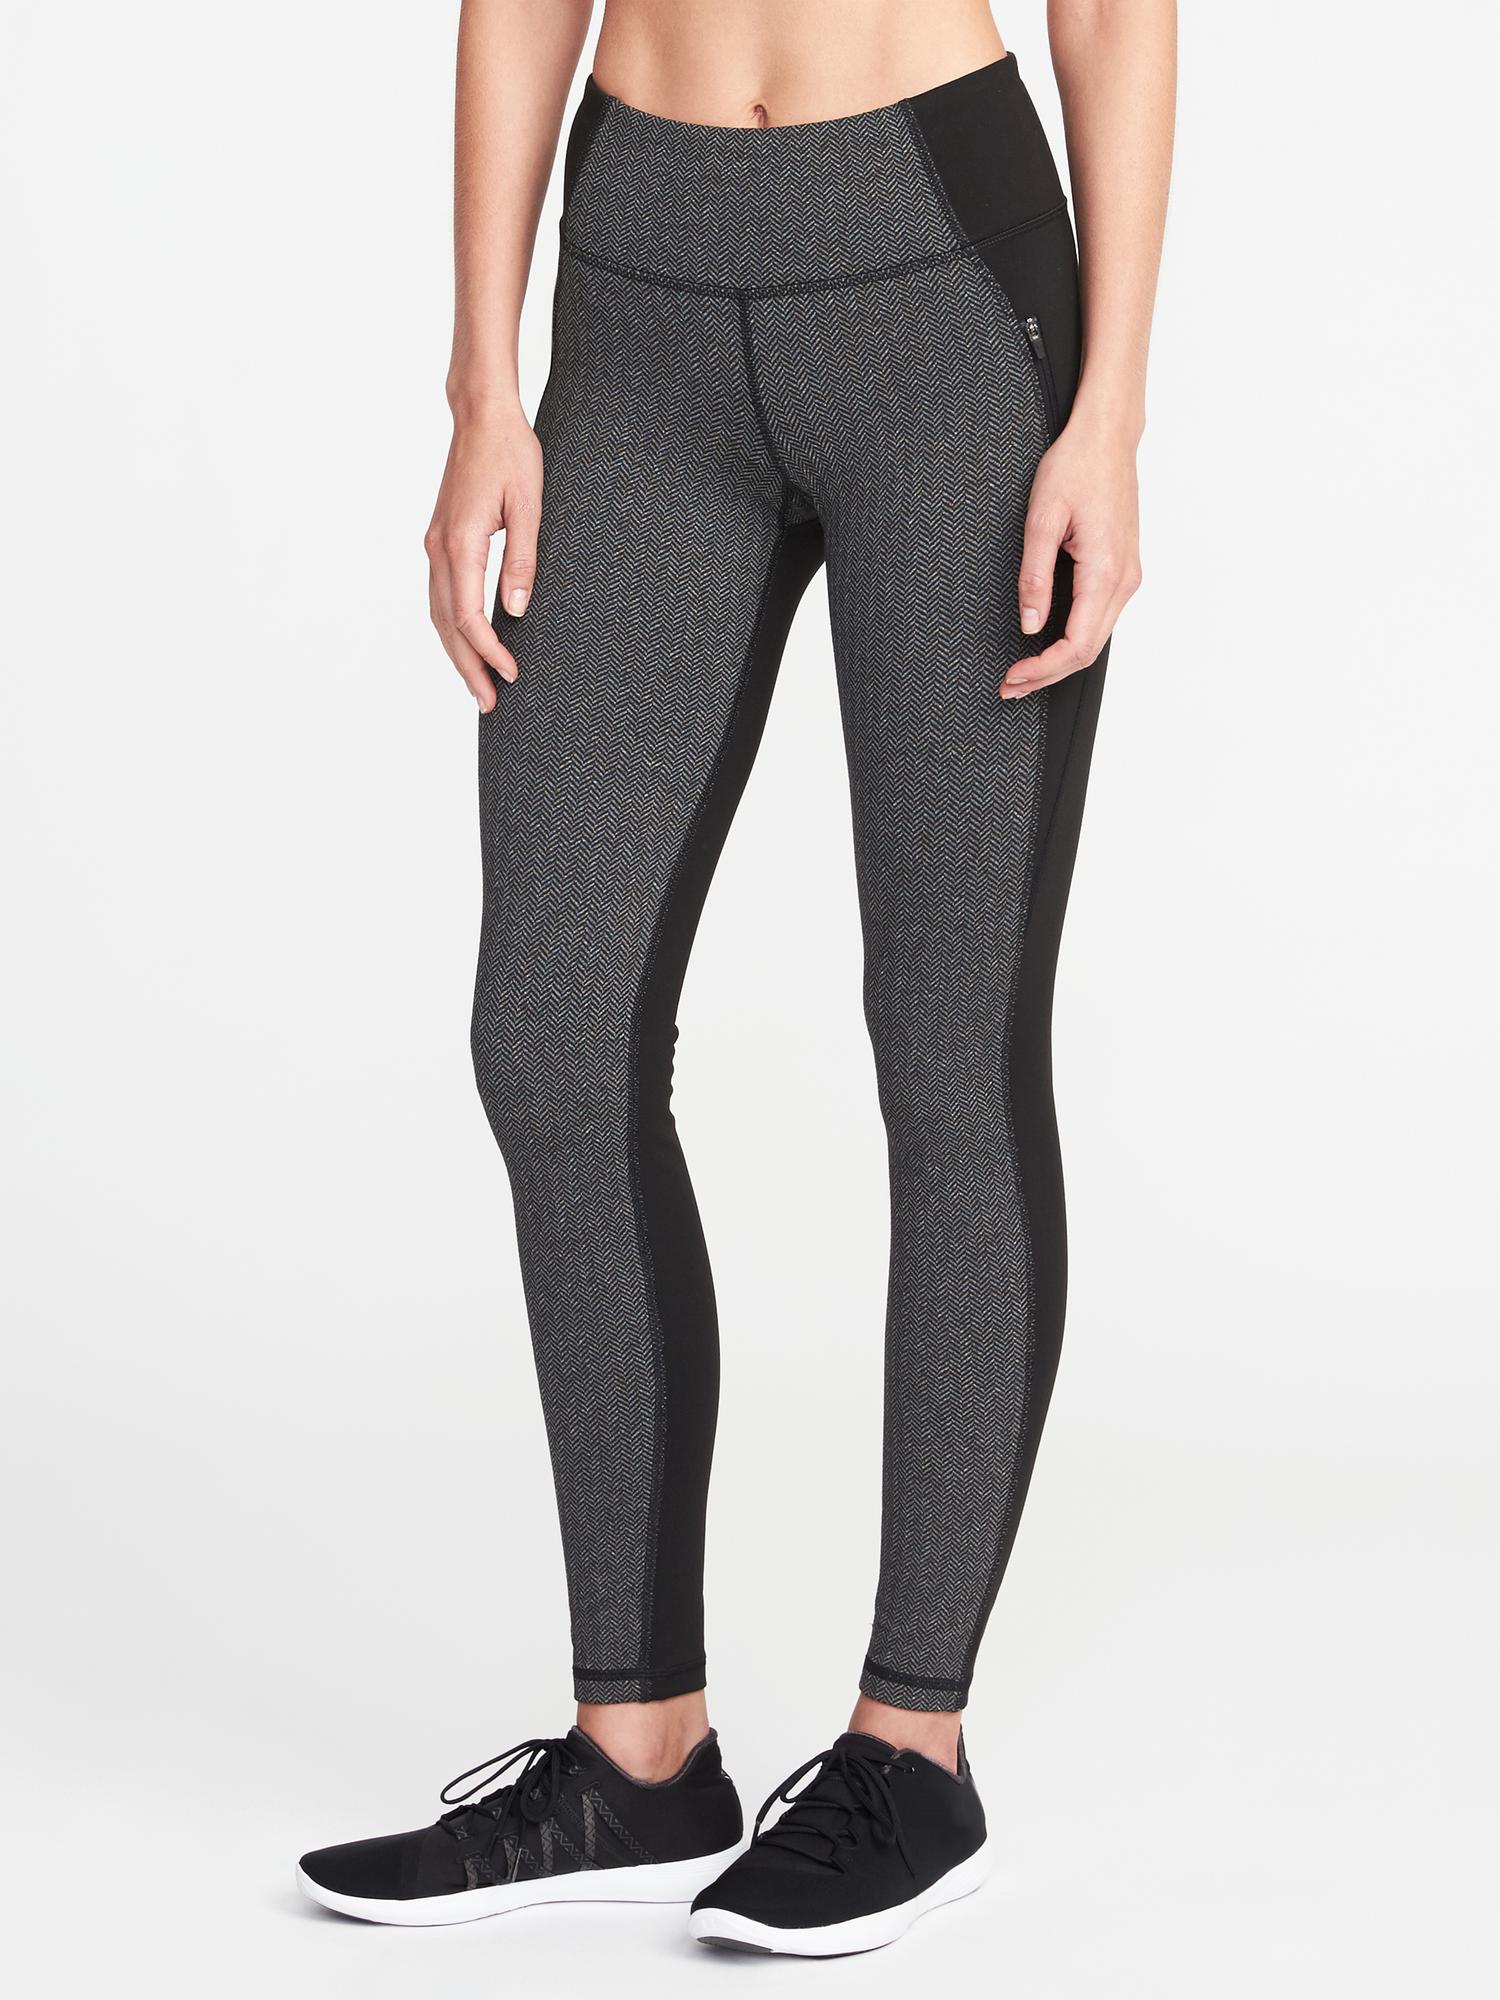 Old Navy, Bottoms, Old Navy Active Go Dry Leggings